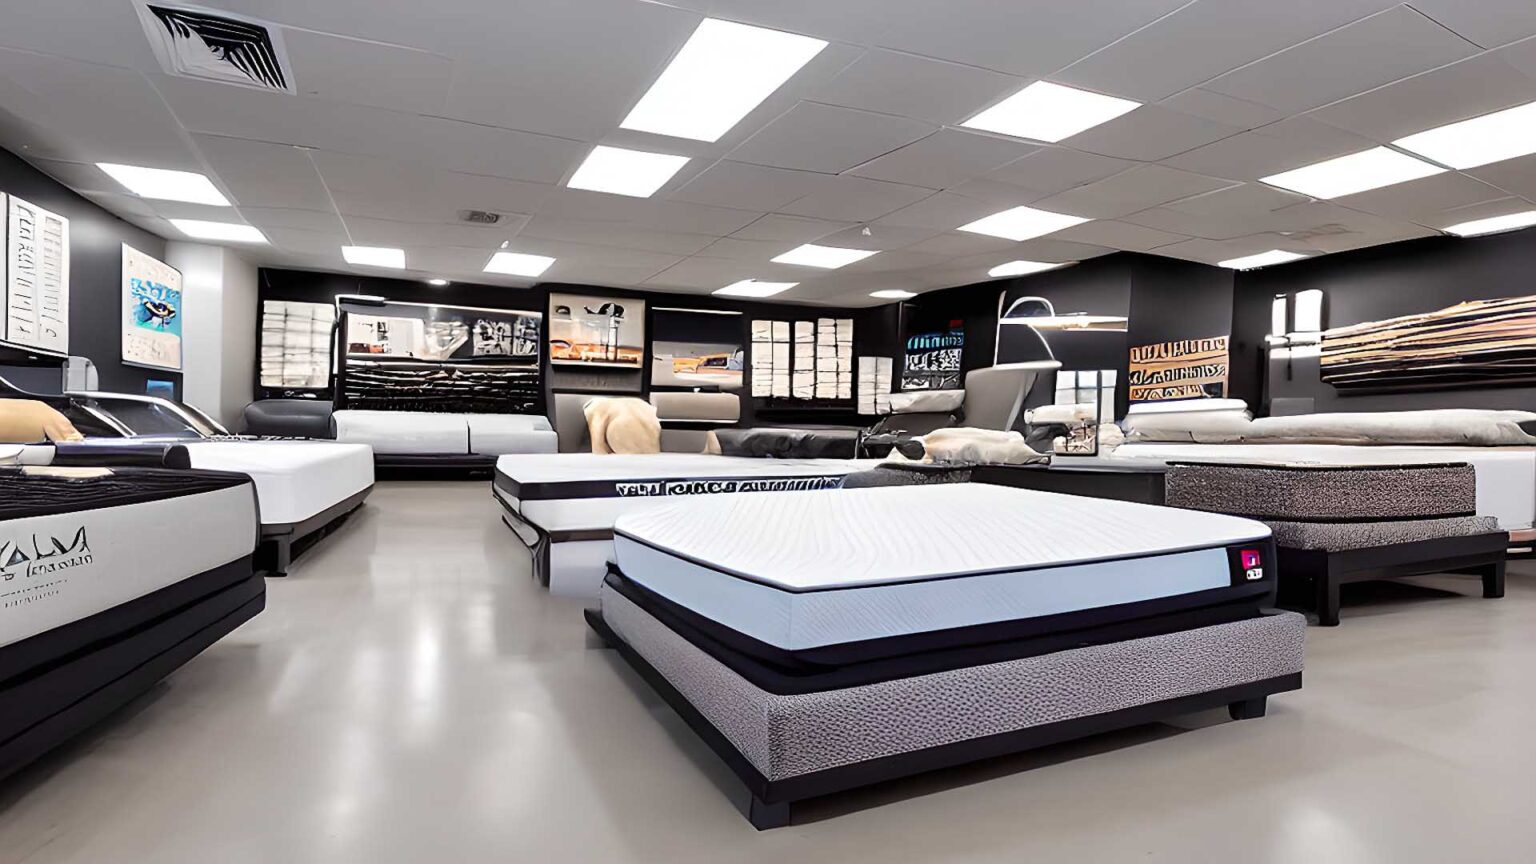 Mattress Stores, mattress dealers, and mattress retailers near me in Commerce City, CO